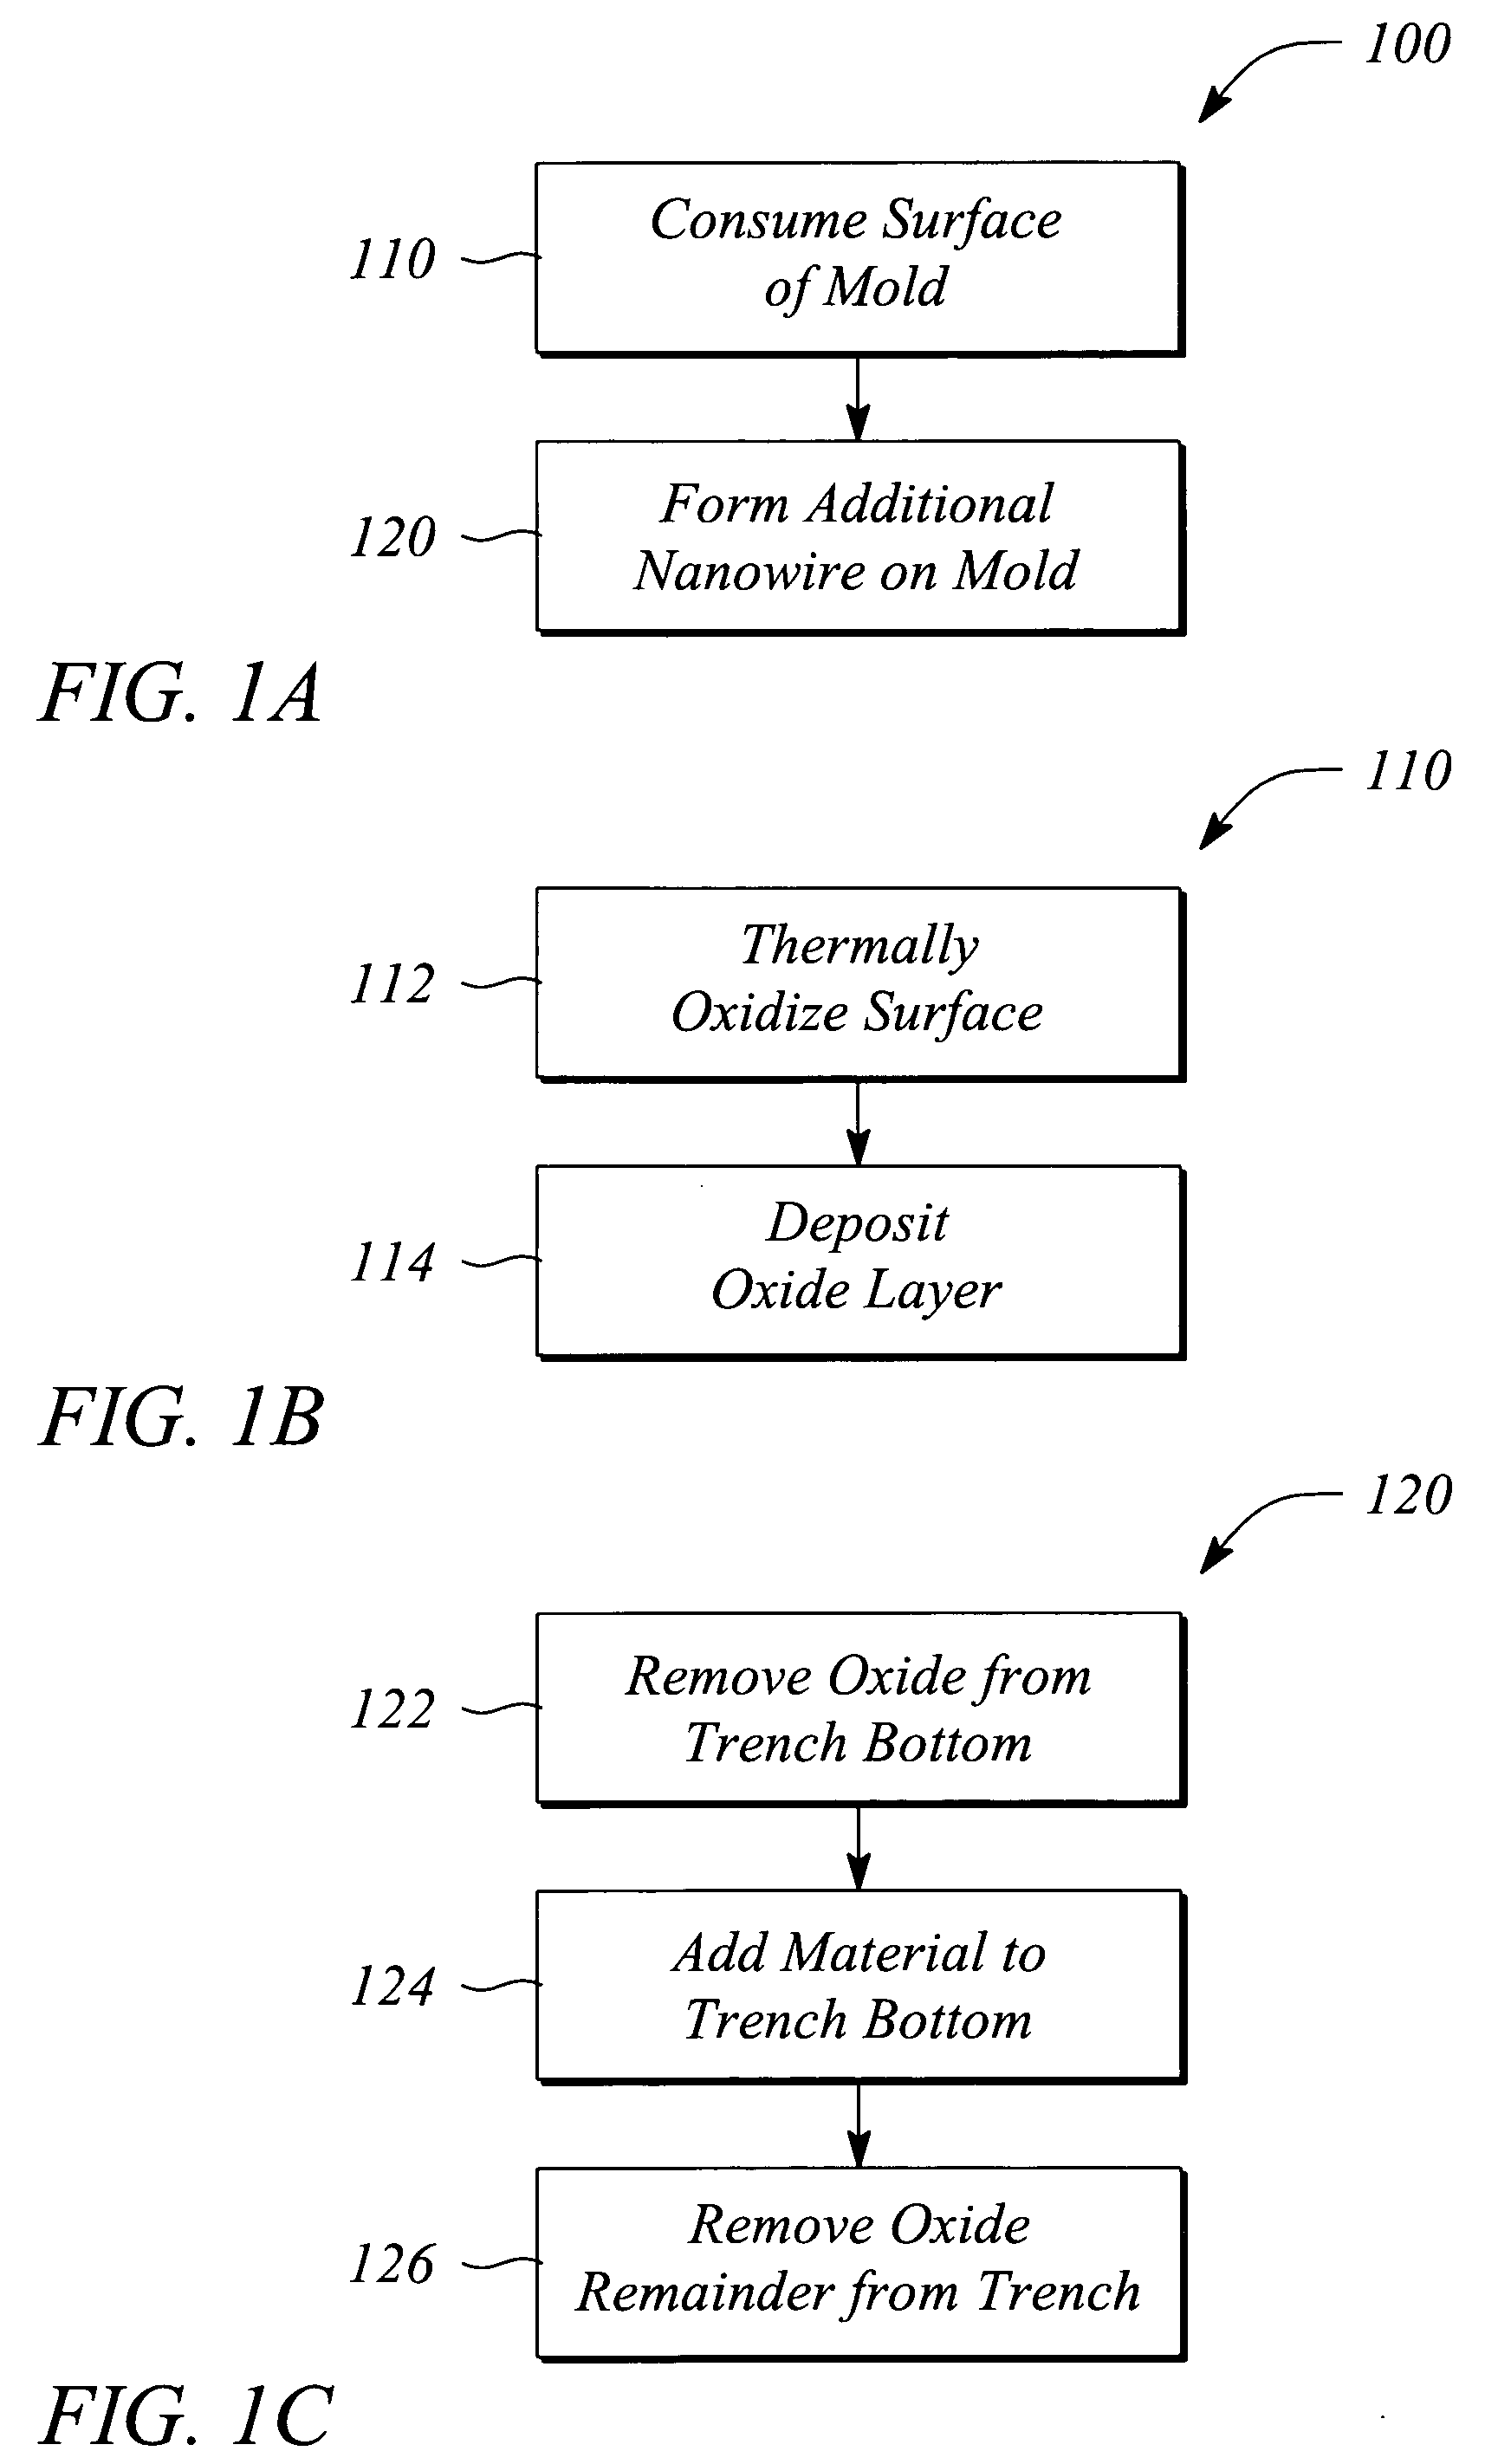 Reduction of a feature dimension in a nano-scale device